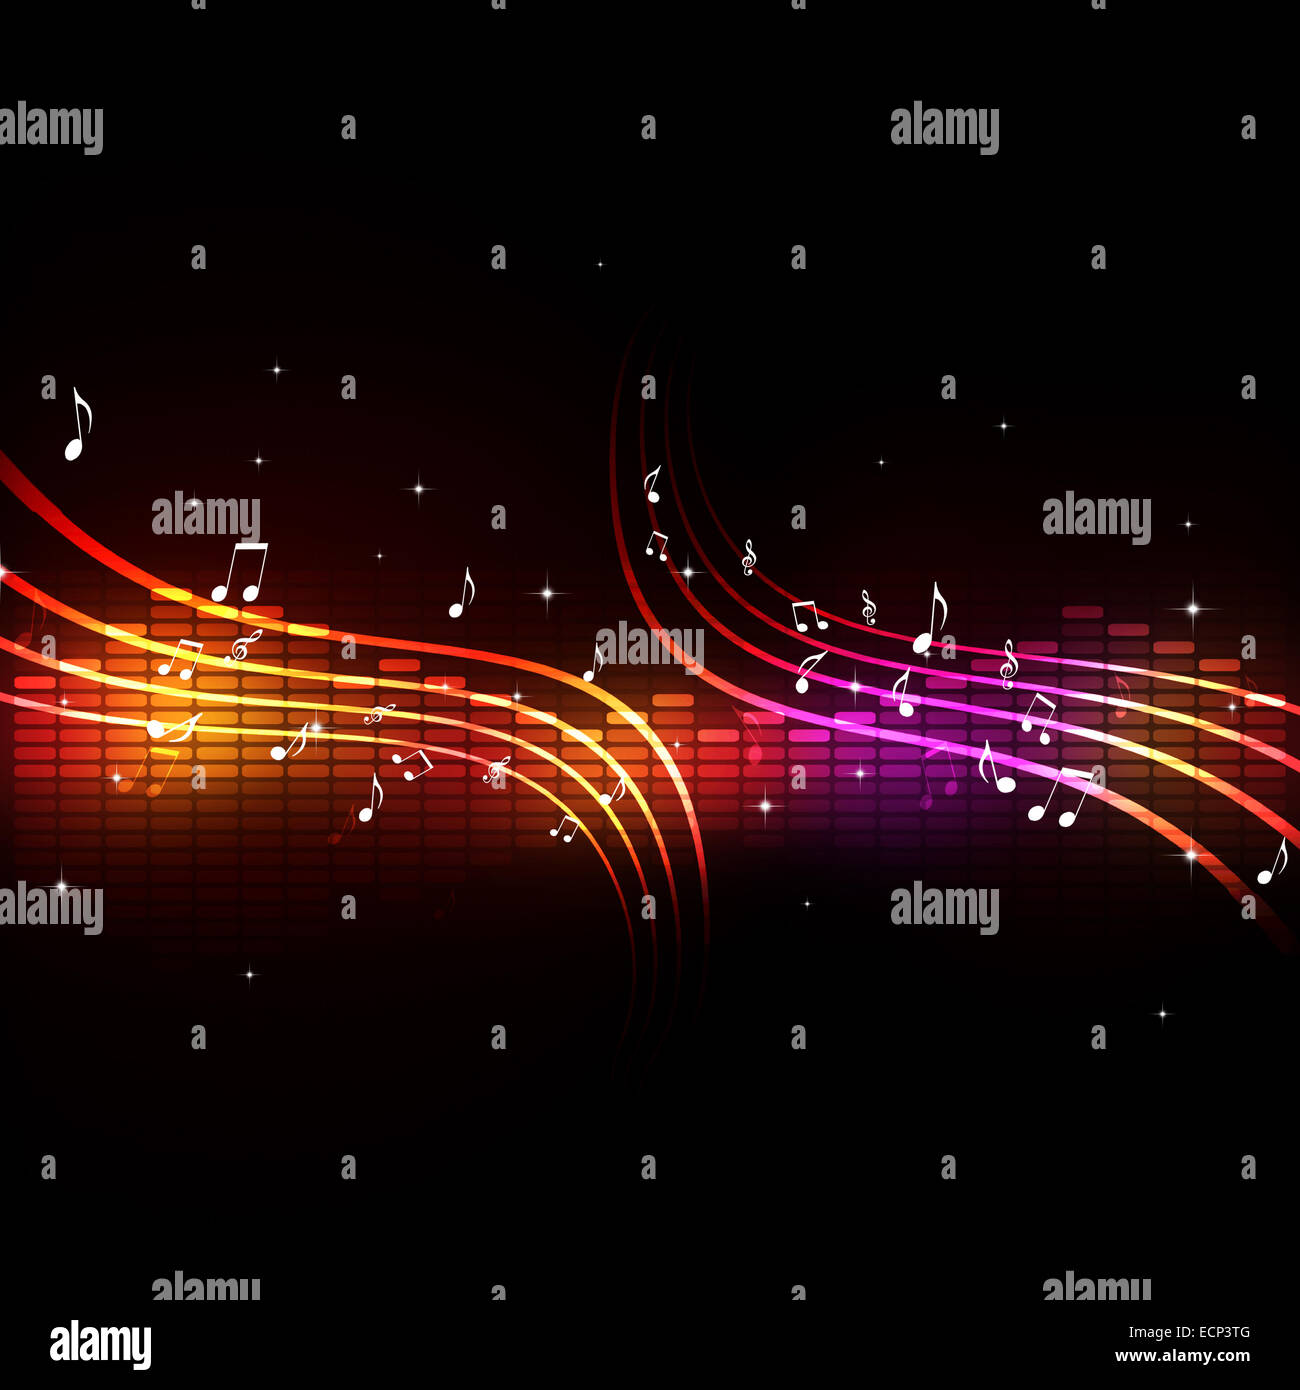 equalizer with music notes background for active dance events Stock Photo